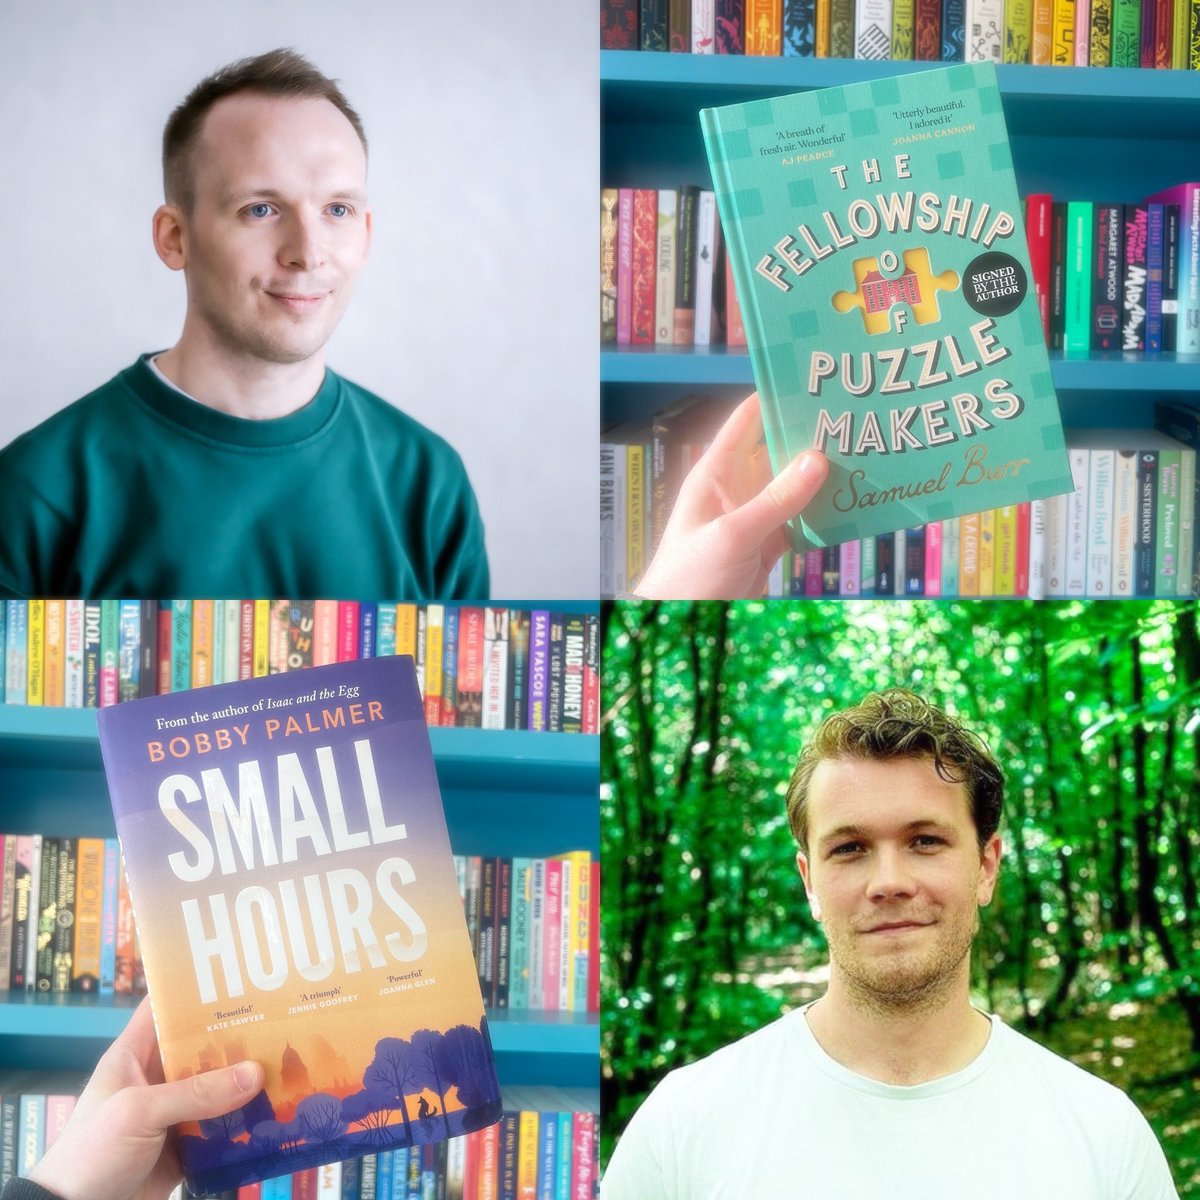 It’s @samuelburr ‘s publication day! Woohoo! Here he is hanging out with @thebobpalmer Next Wednesday, he’ll be doing it for real at Bert’s. Why don’t you come along and join us? #Swindon